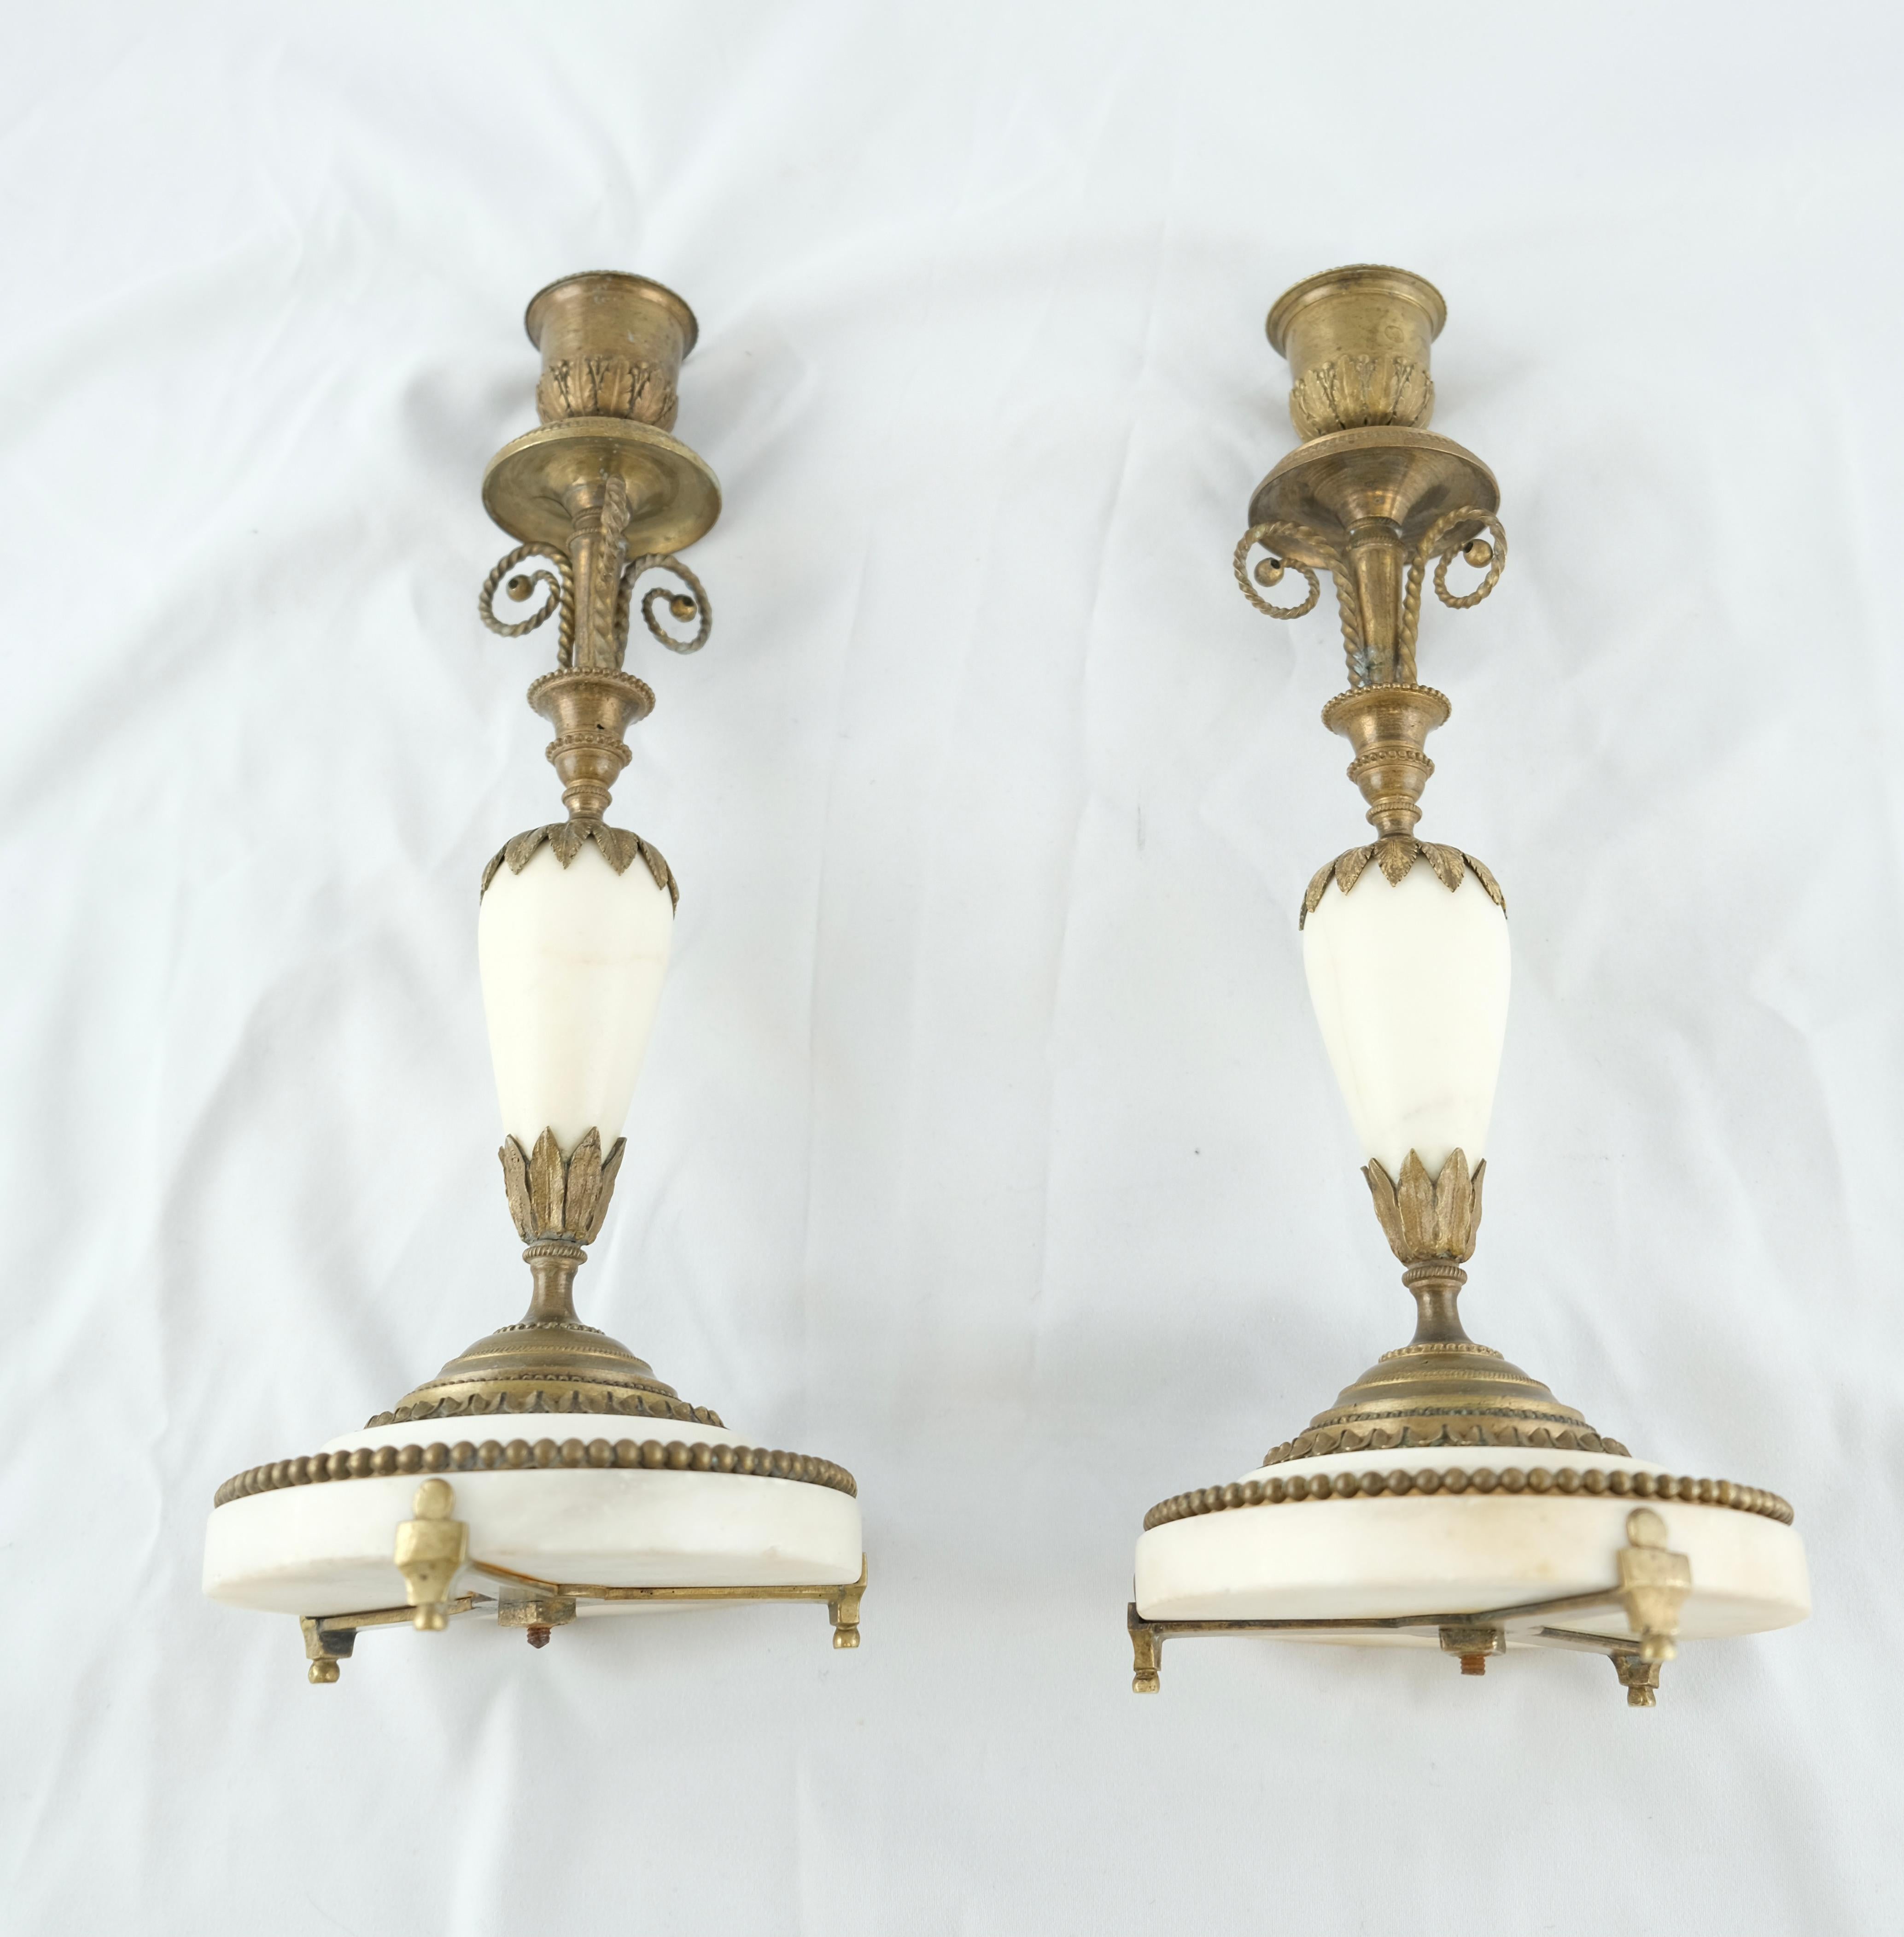 Pair of French Directoire Candlesticks Made in the 1790s For Sale 5